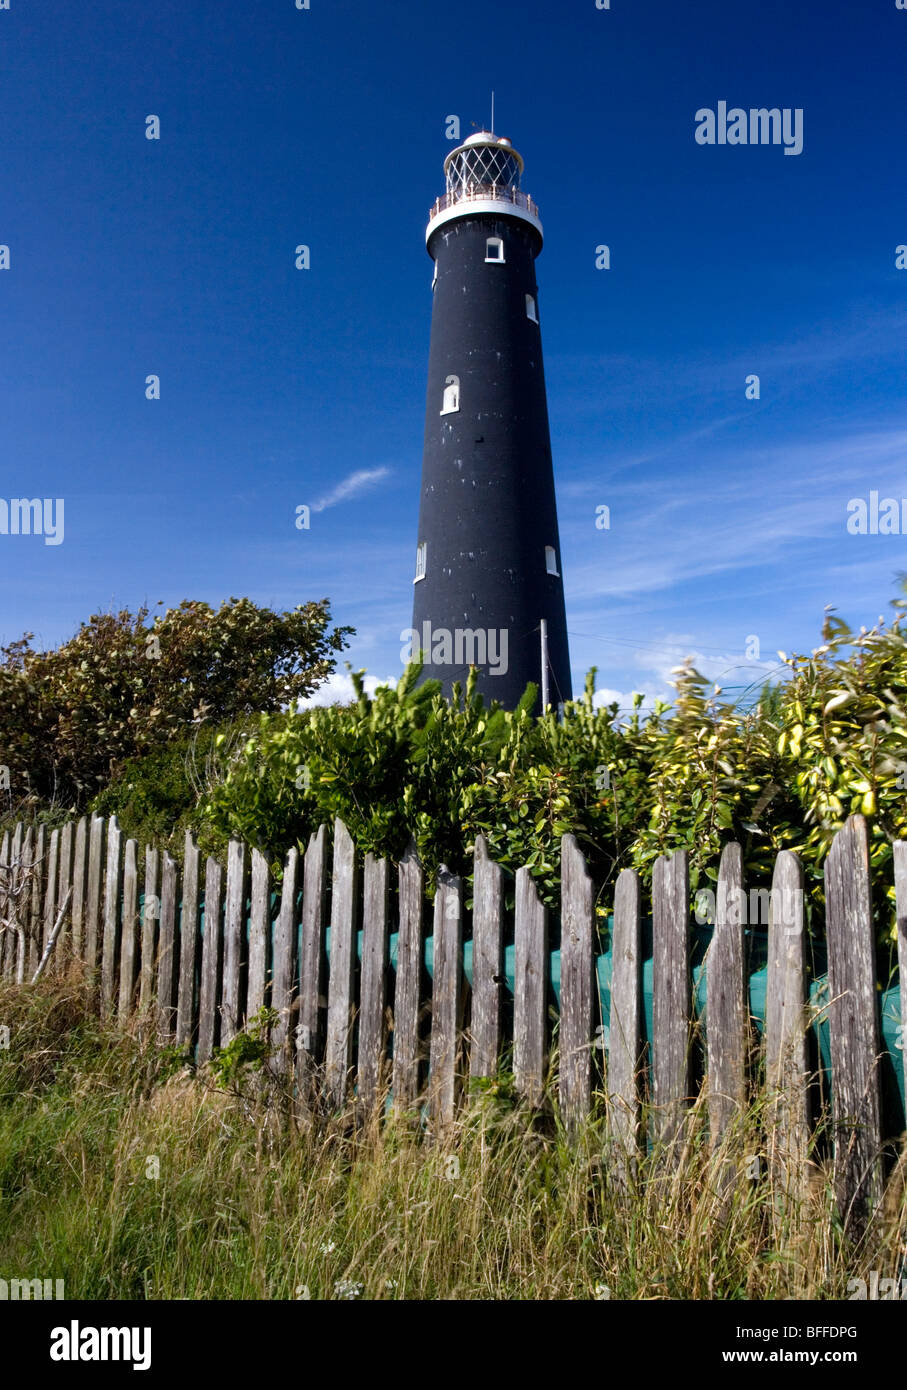 The old Lighthouse at Dungeness, UK. Stock Photo